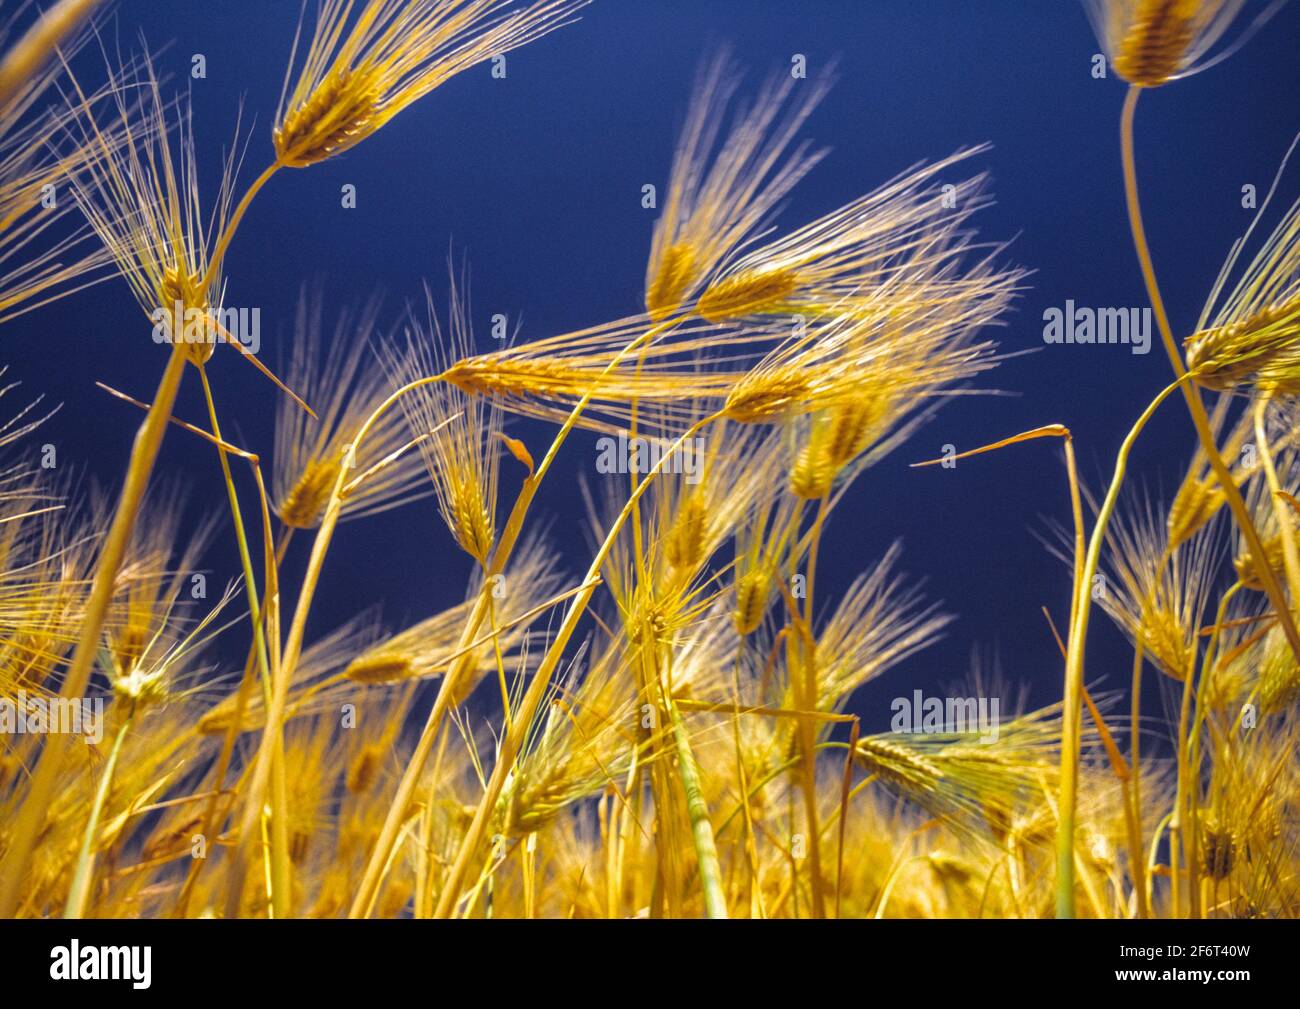 Barley, a hardy cereal that has coarse bristles extending from the ears. It is widely cultivated, chiefly for use in brewing and stockfeed. Stock Photo